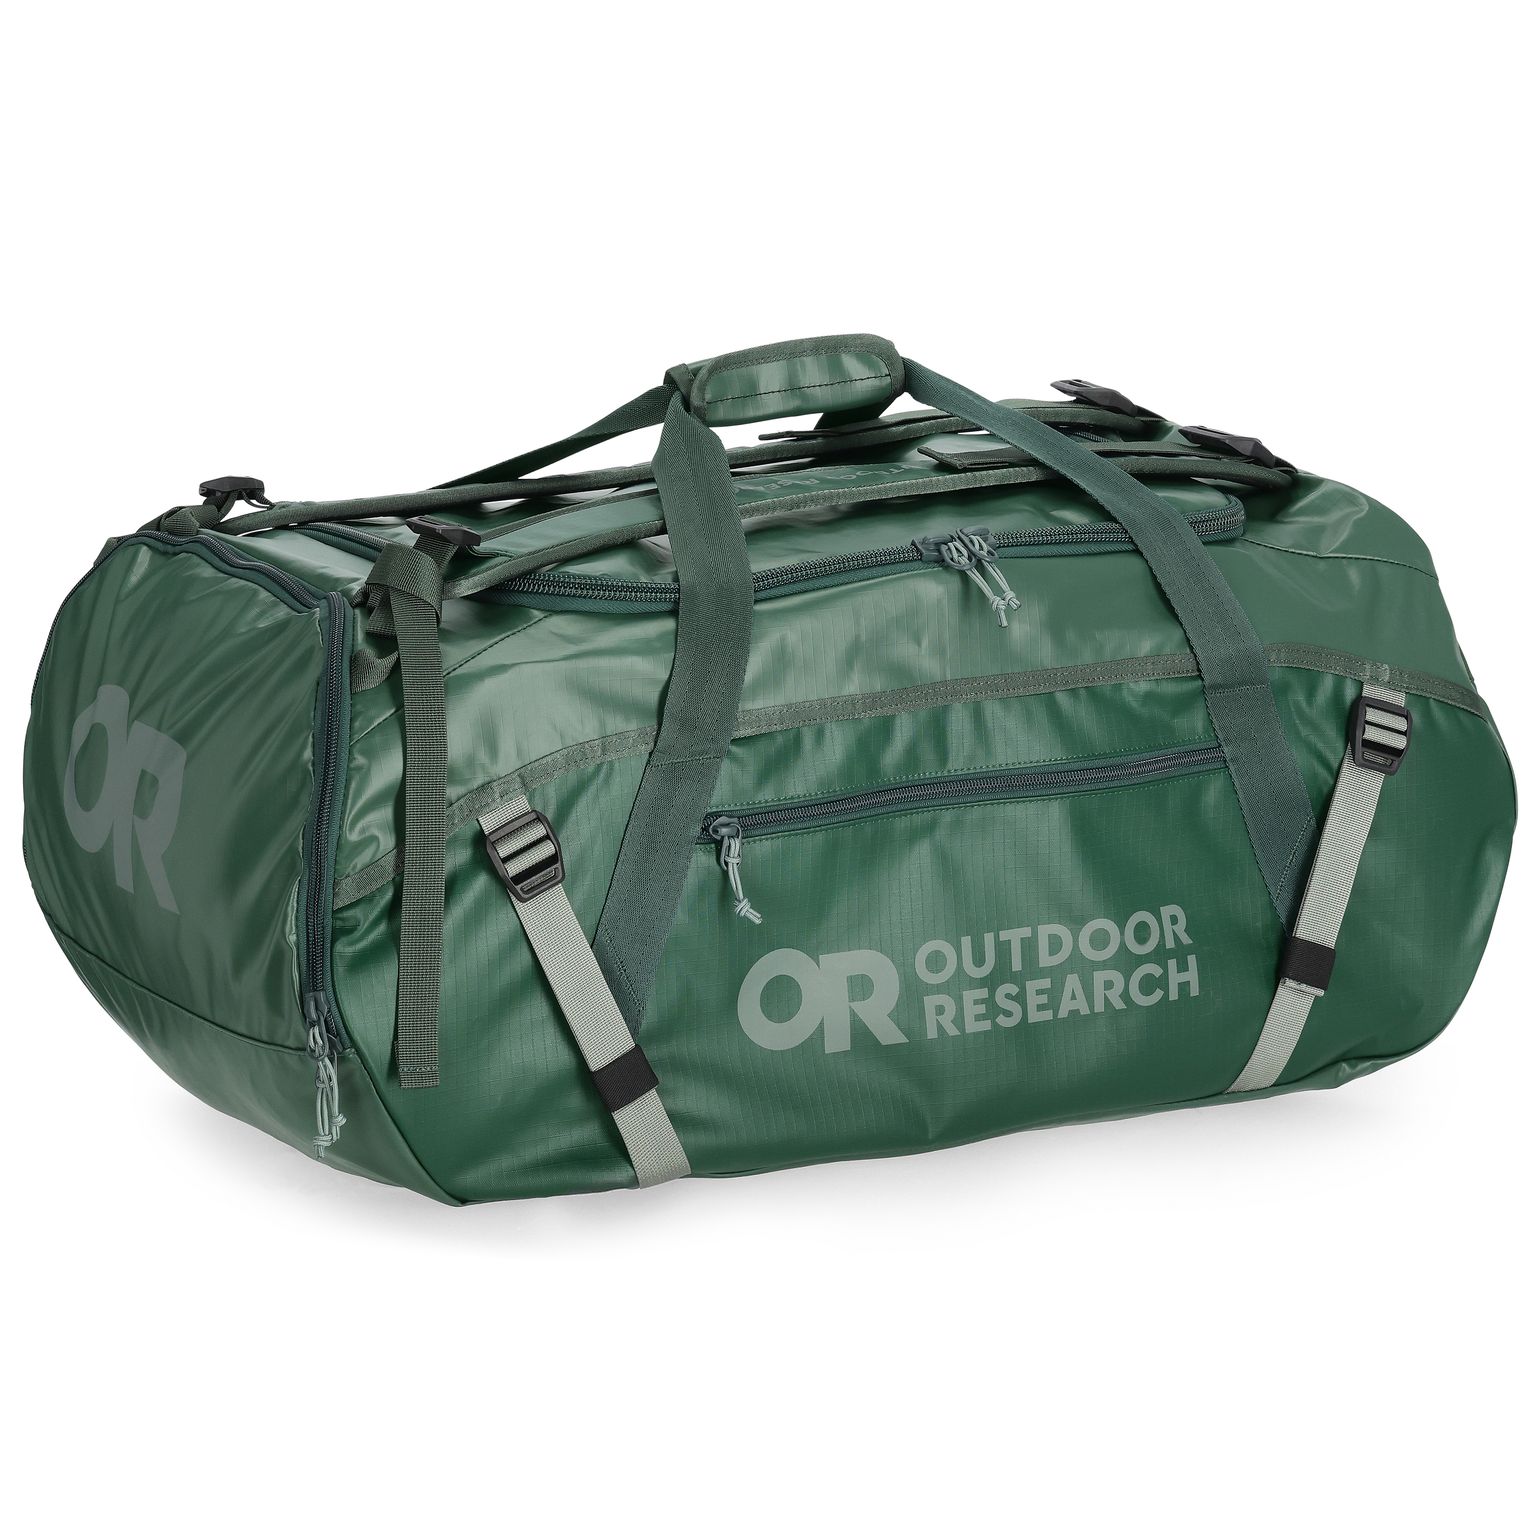 Outdoor Research Carryout Duffel 65l Grove